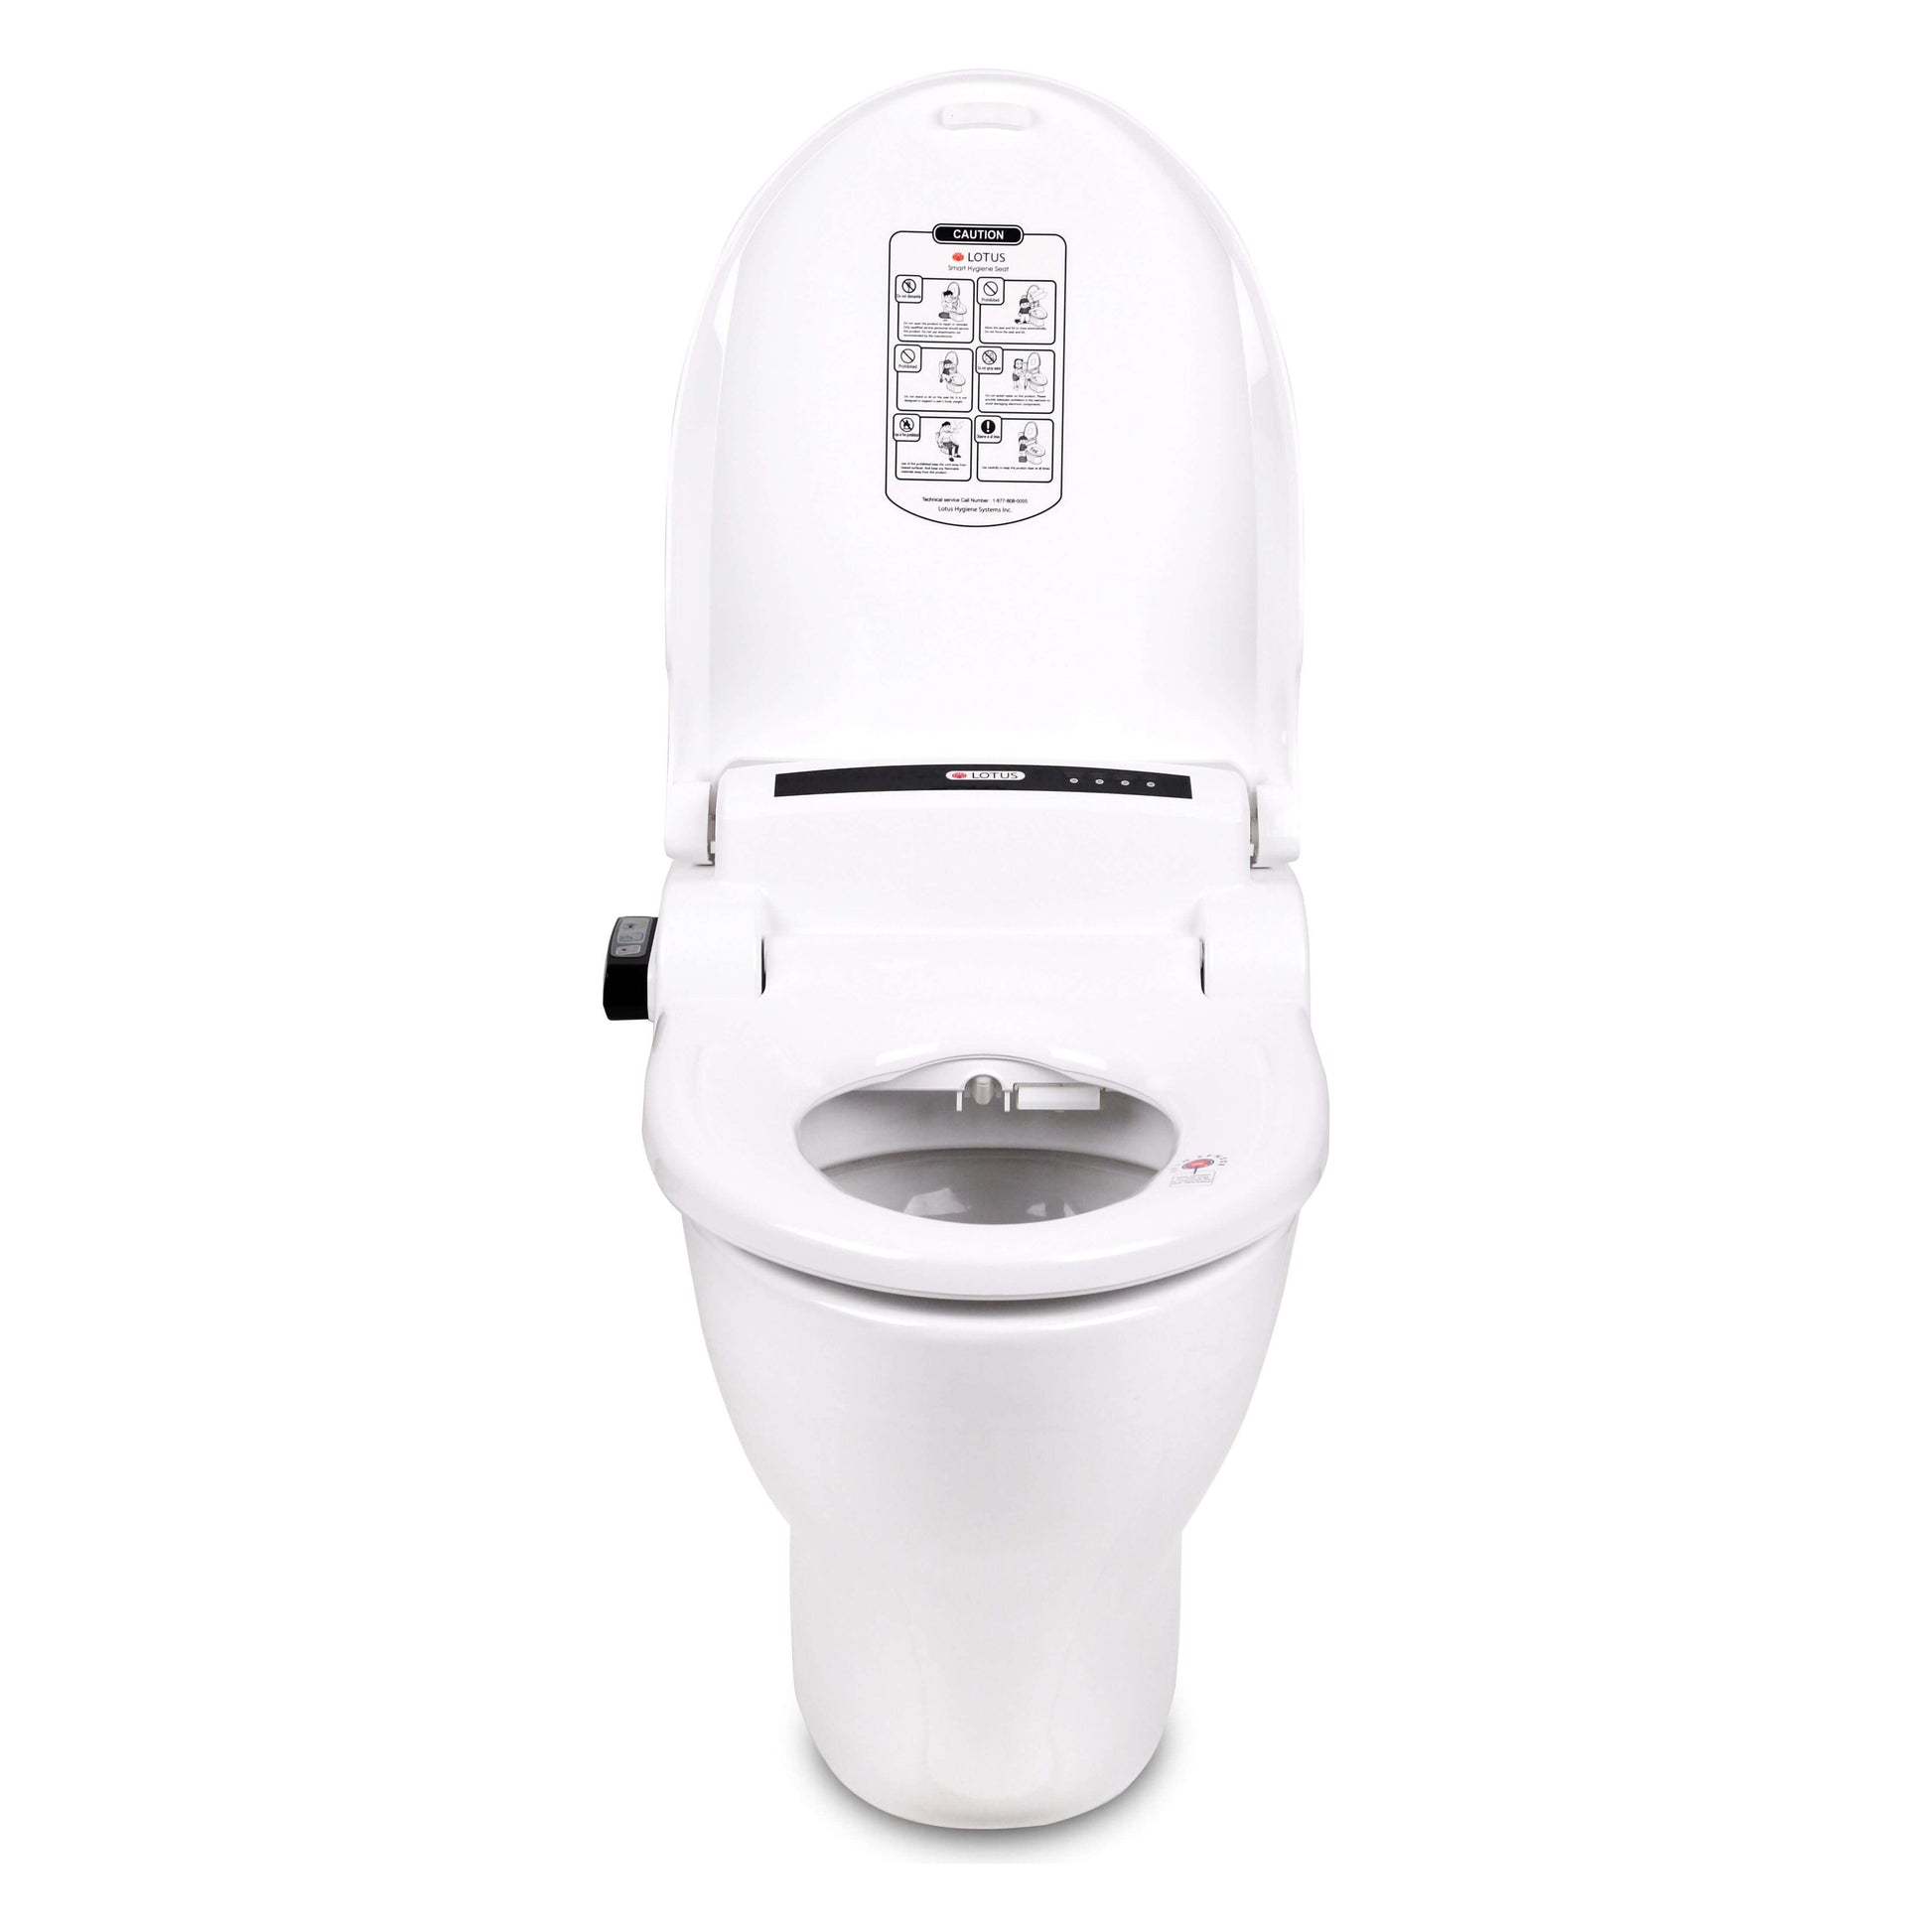 Lotus Bidet Seat ATS-1000 - front view with lid open attached to a toilet